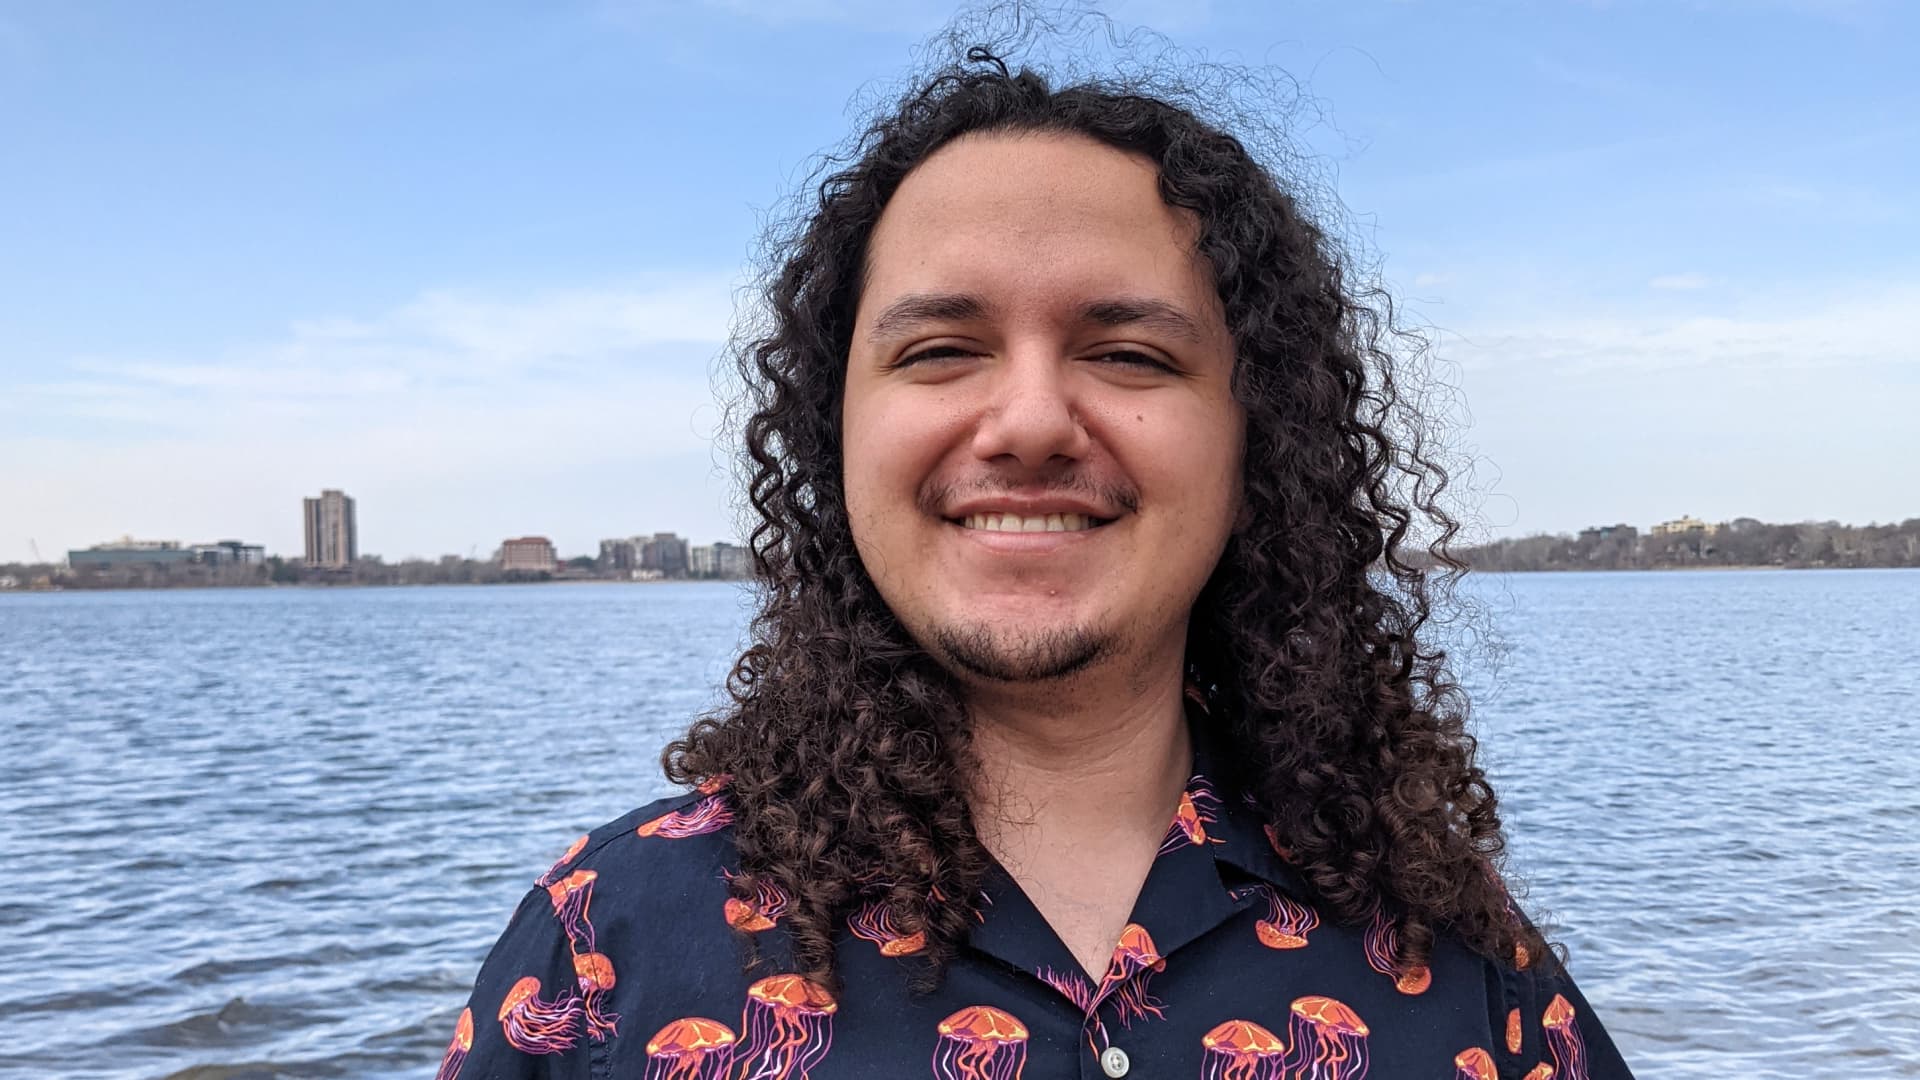 Charles Golding is a member of the Quechan Tribe and is a recent graduate from the University of Minnesota Twin Cities where he received a B.A. in American Indian studies and economics.